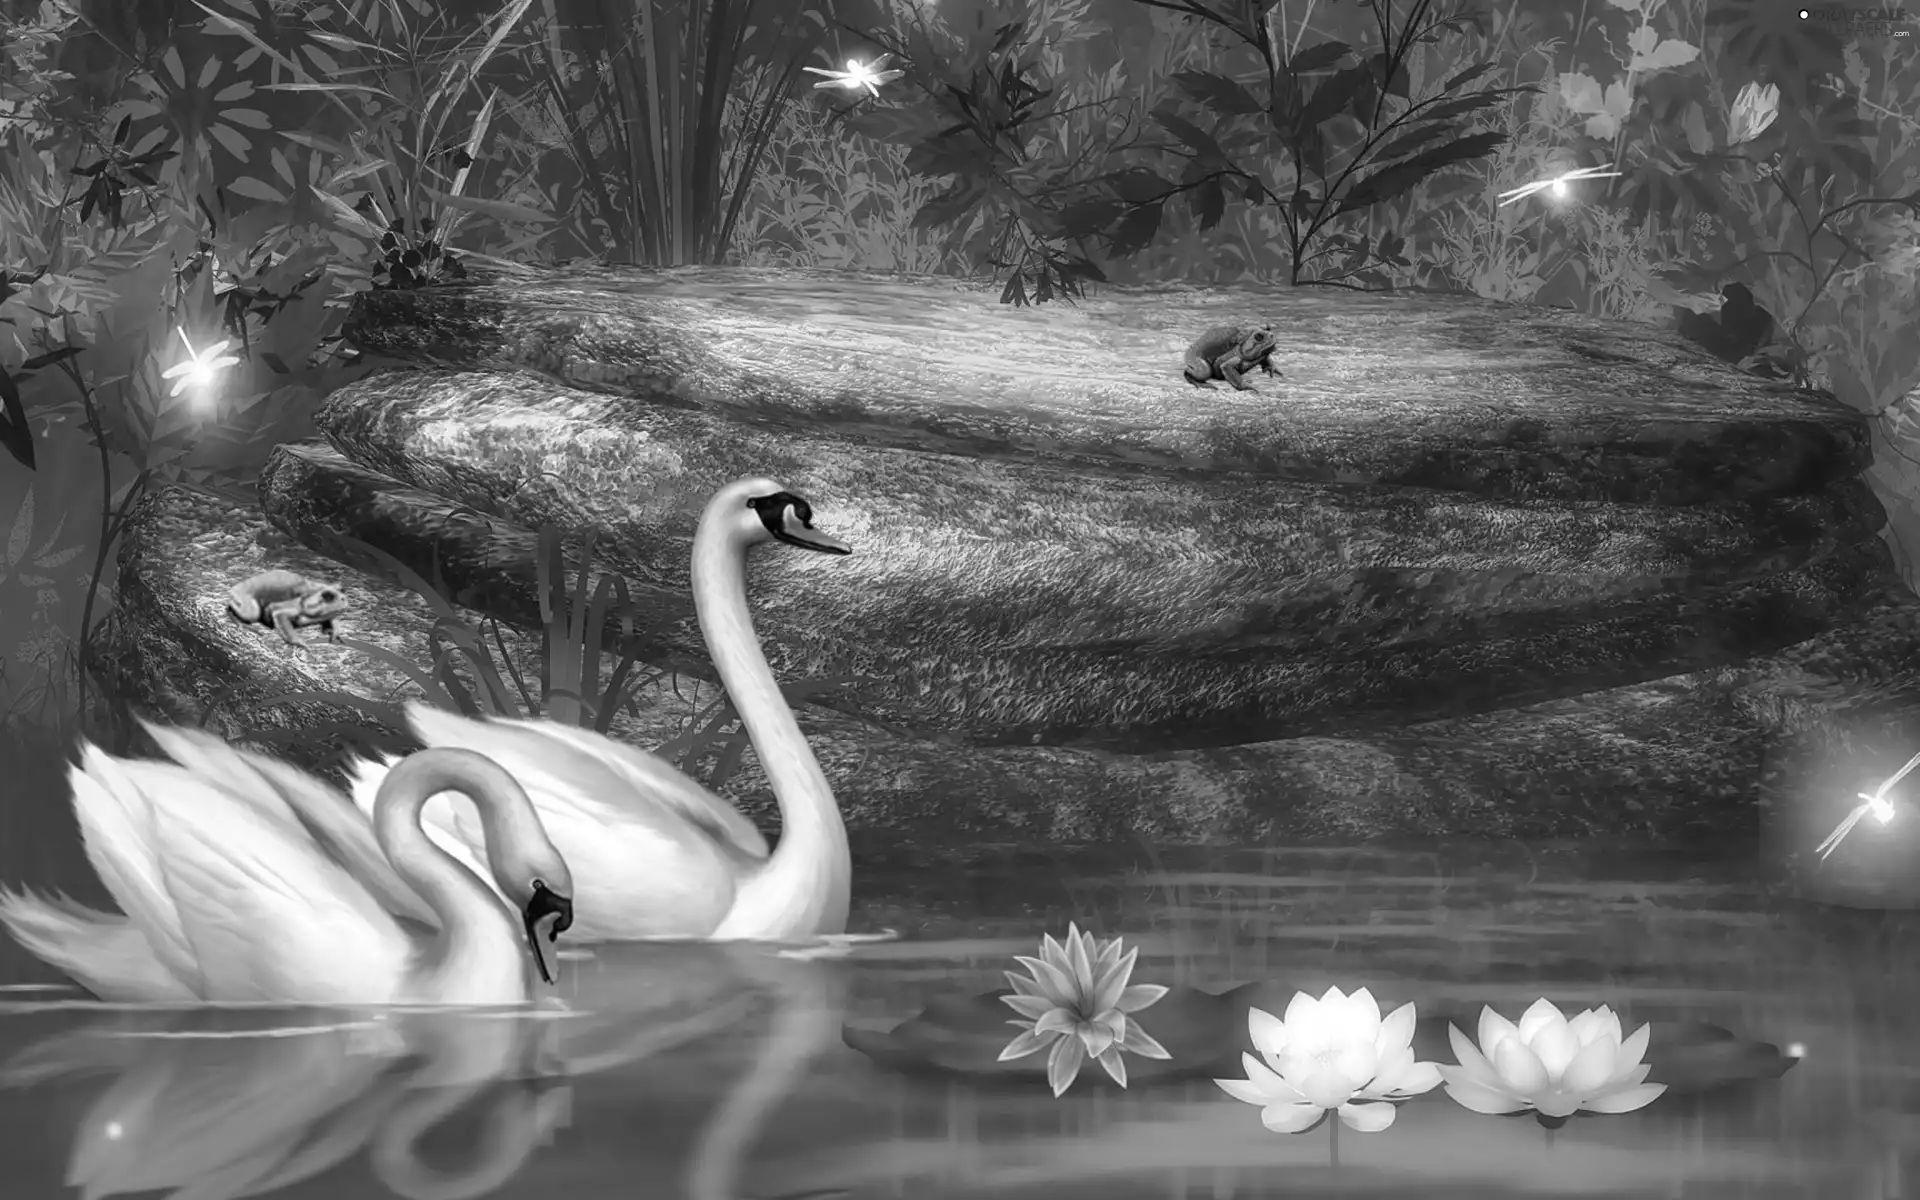 Two cars, lilies, water, Swan